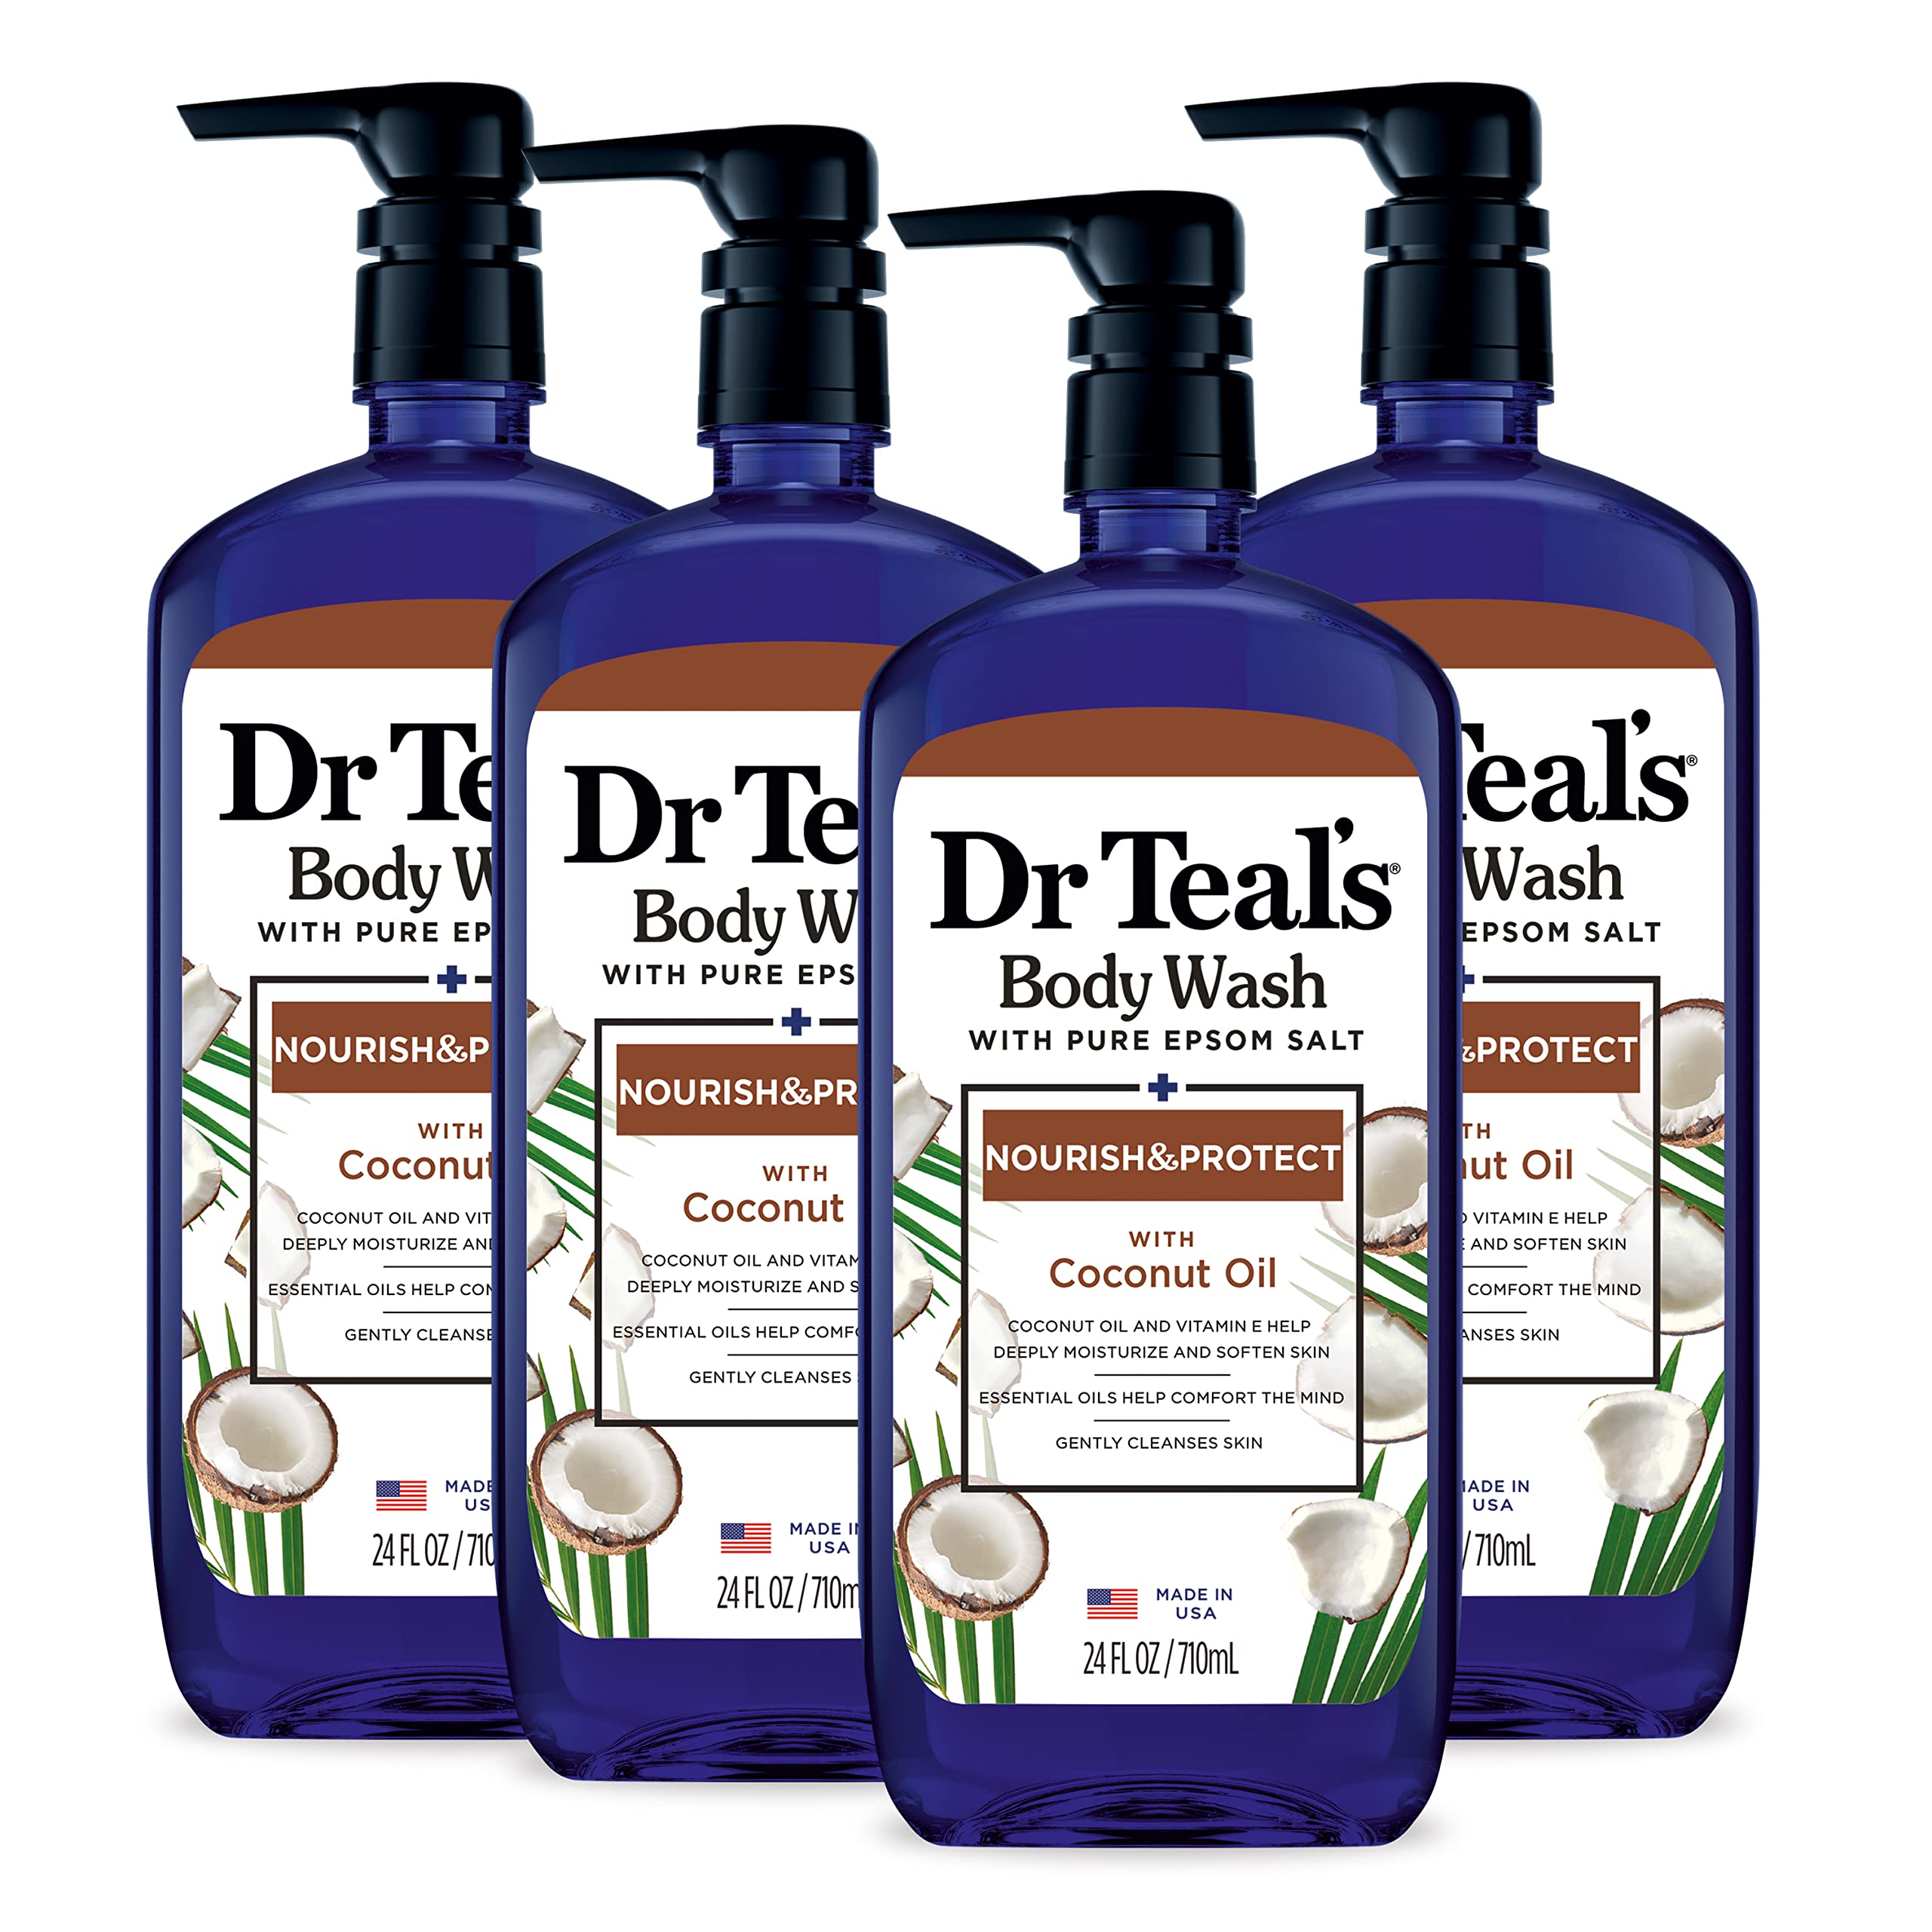 Dr Teal's Body Wash with Pure Epsom Salt, with Coconut Oil, 24 fl oz (Pack of 4) (Packaging May Vary)